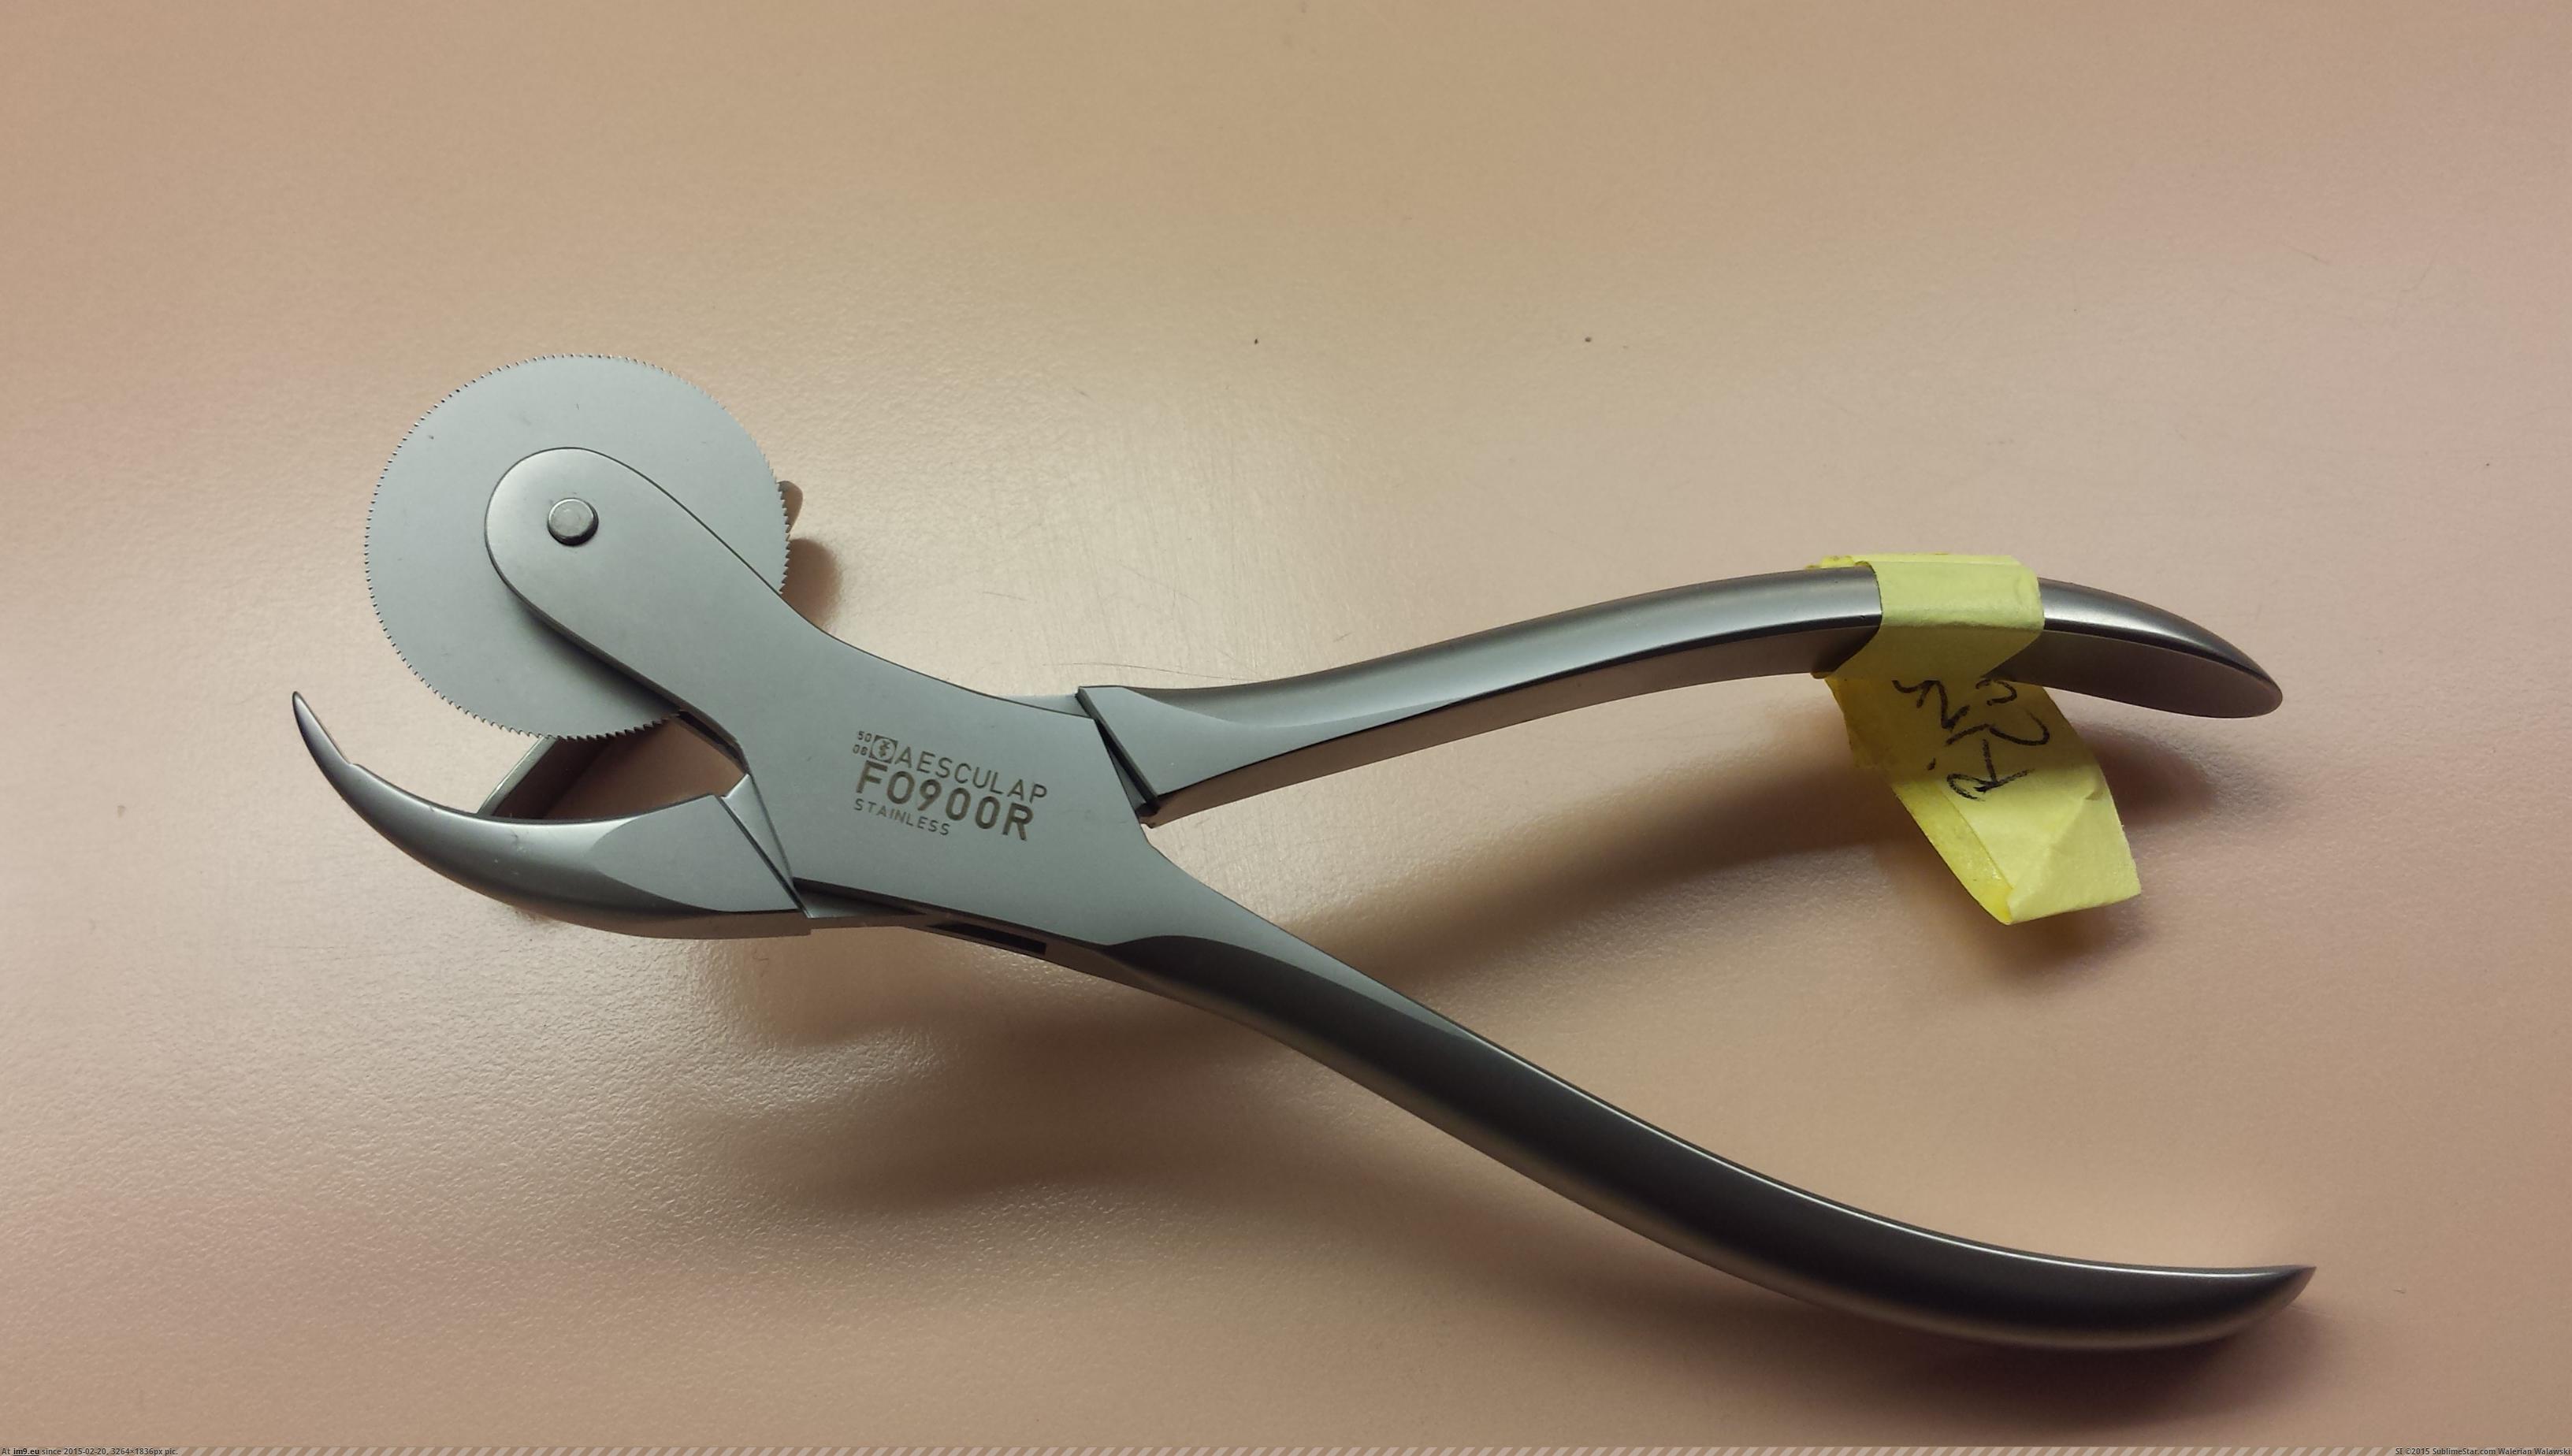 The tool we use in emergent situations to remove rings from fingers that  are too swollen. : r/mildlyinteresting